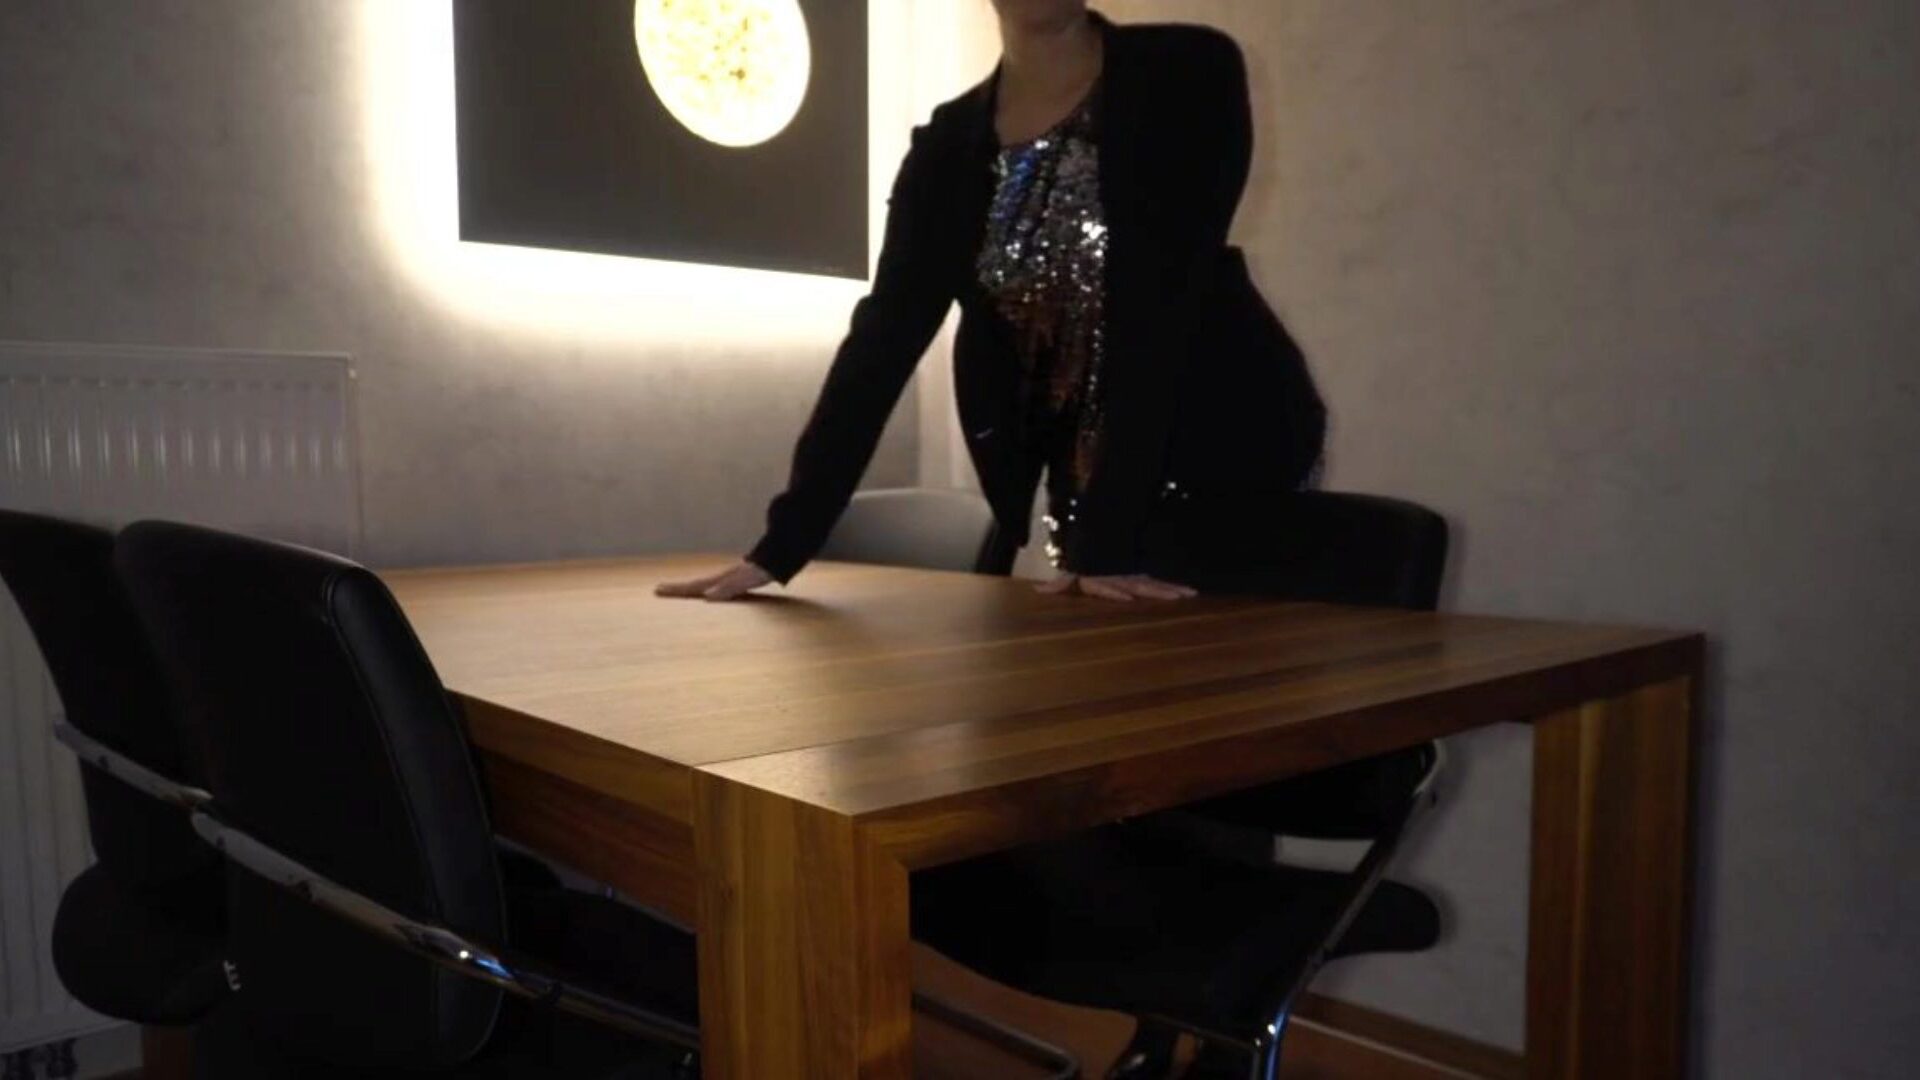 Boss Fucks Secretary Anally on the Table... Watch Boss Fucks Secretary Anally on the Table - Business-bitch episode on xHamster - the ultimate bevy of free-for-all Danish MILF HD porn tube videos